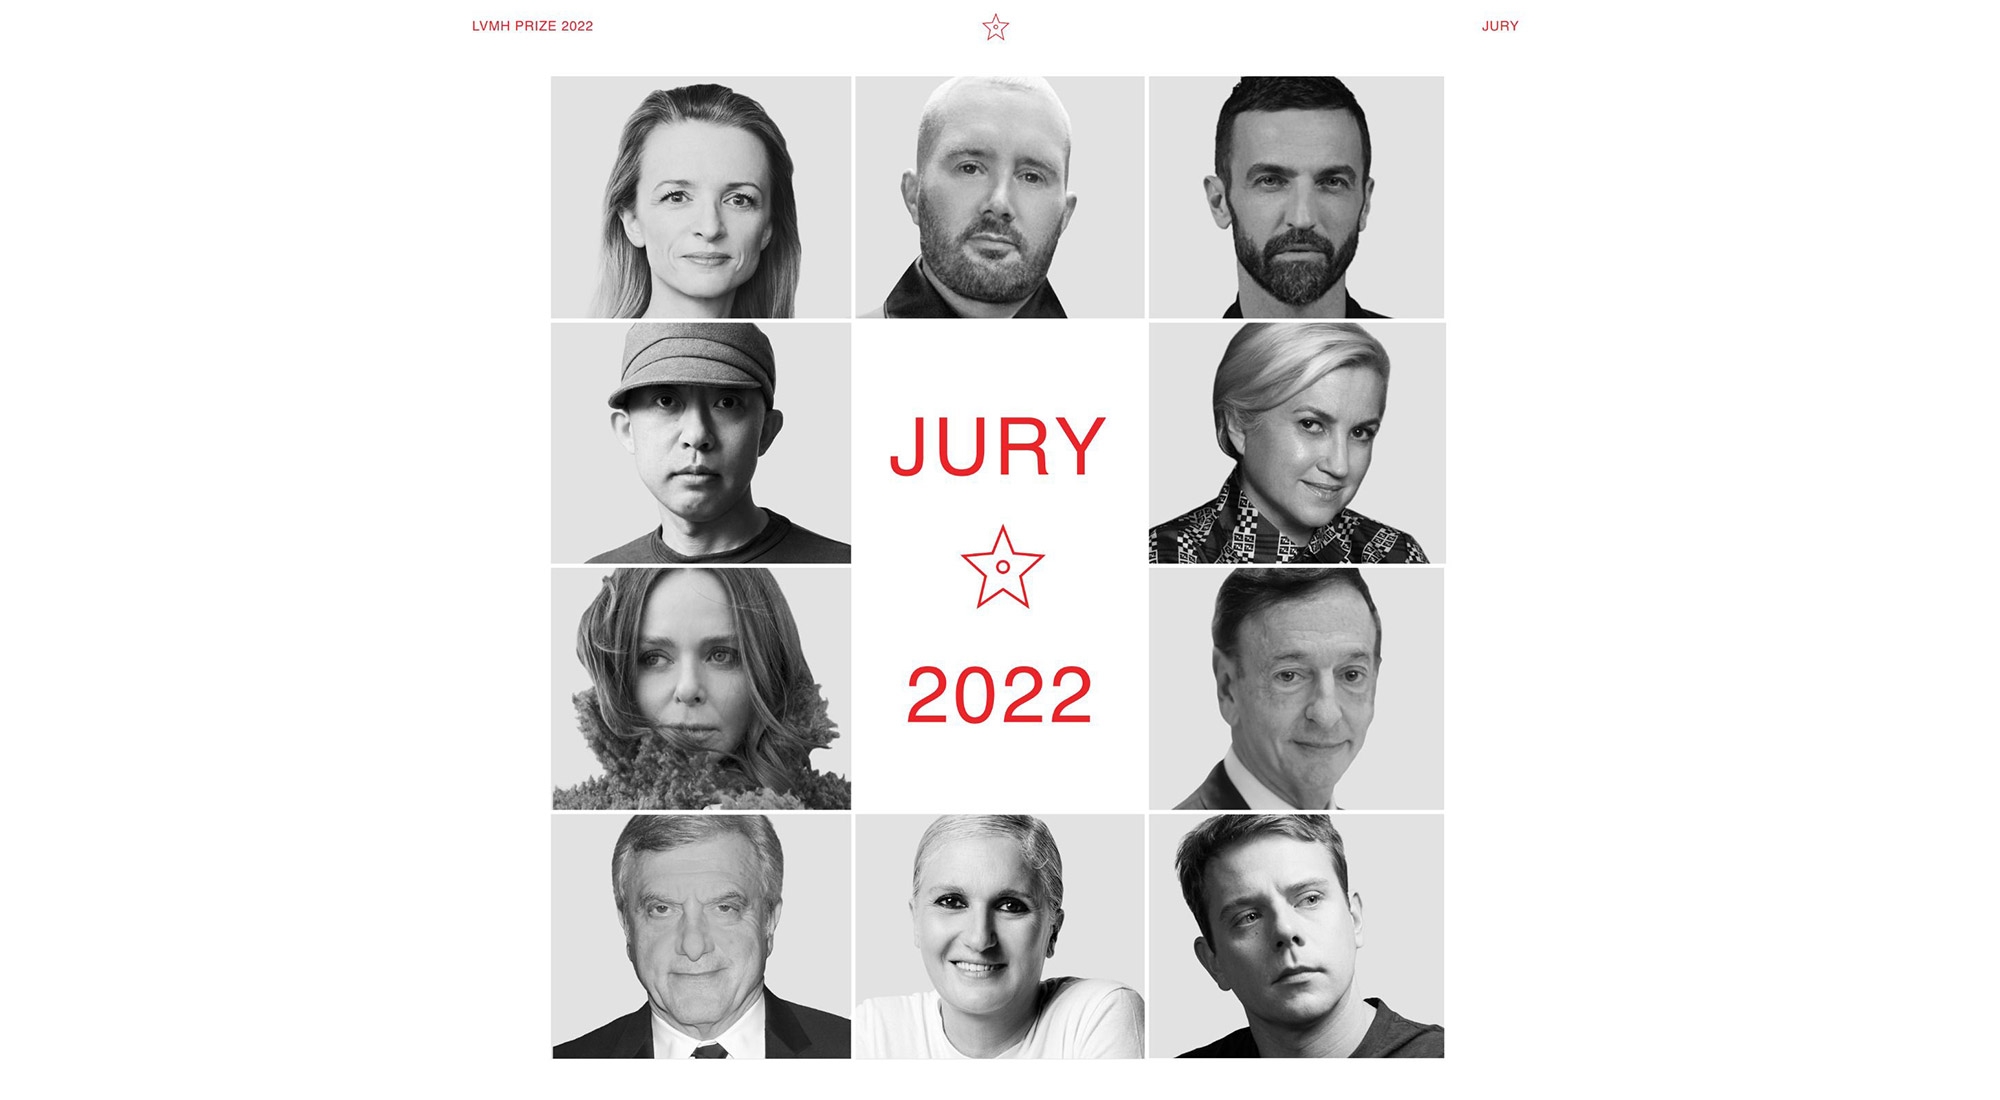 The LVMH Prize 2022 names eight finalists